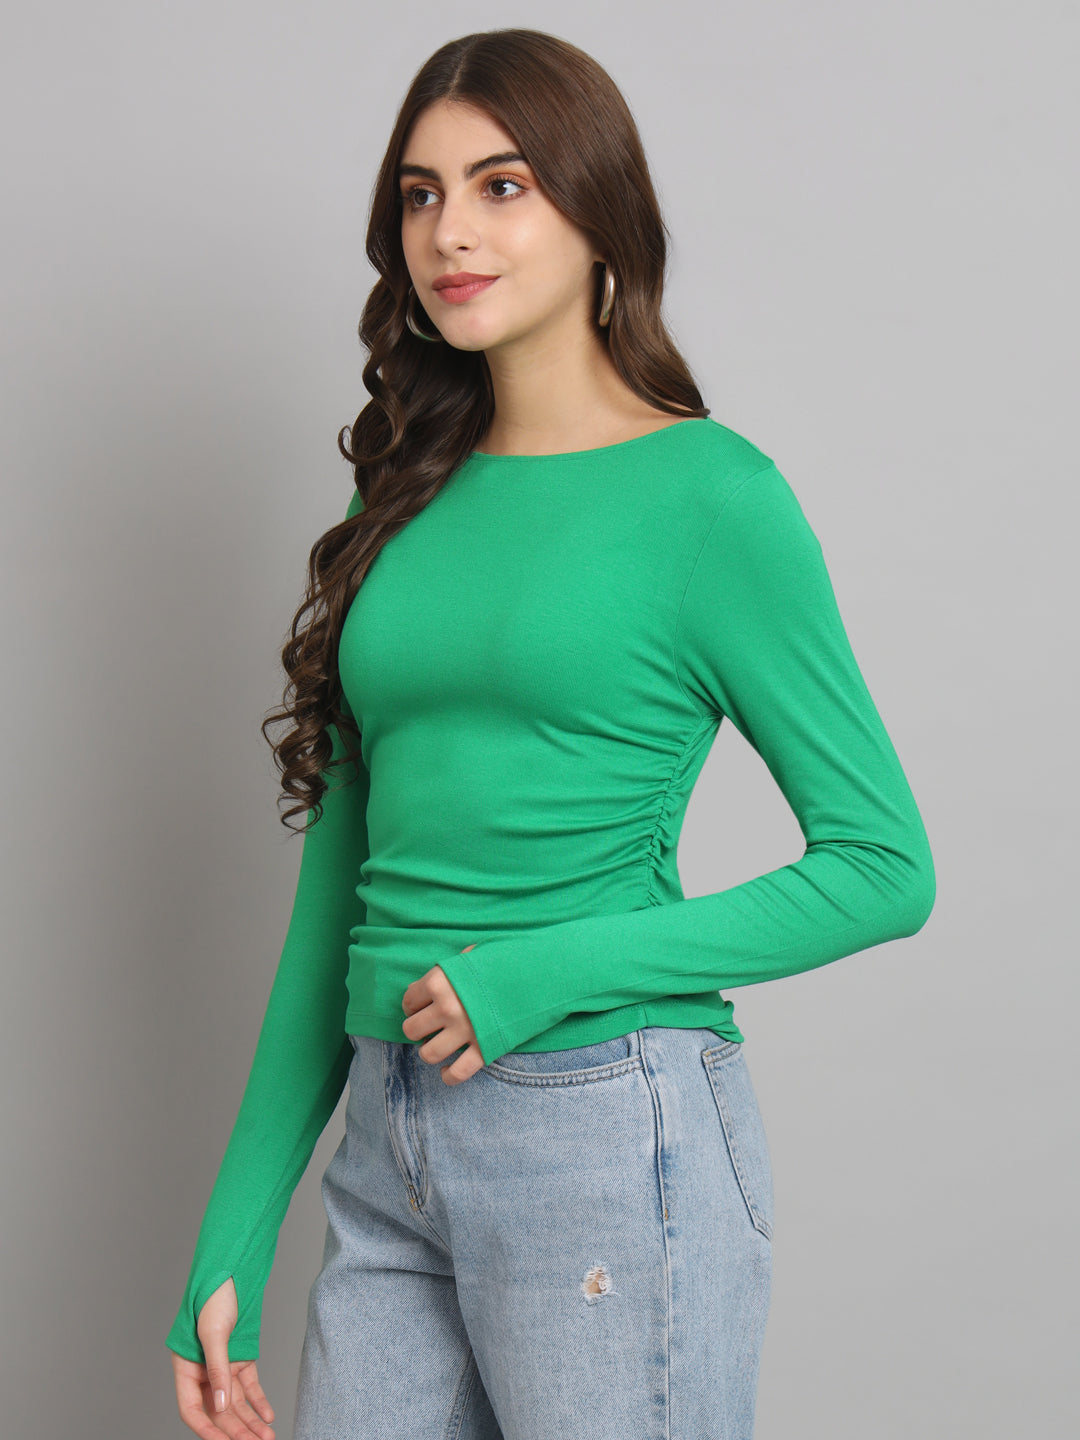 Bottle Green Boat Neck Fitted Top